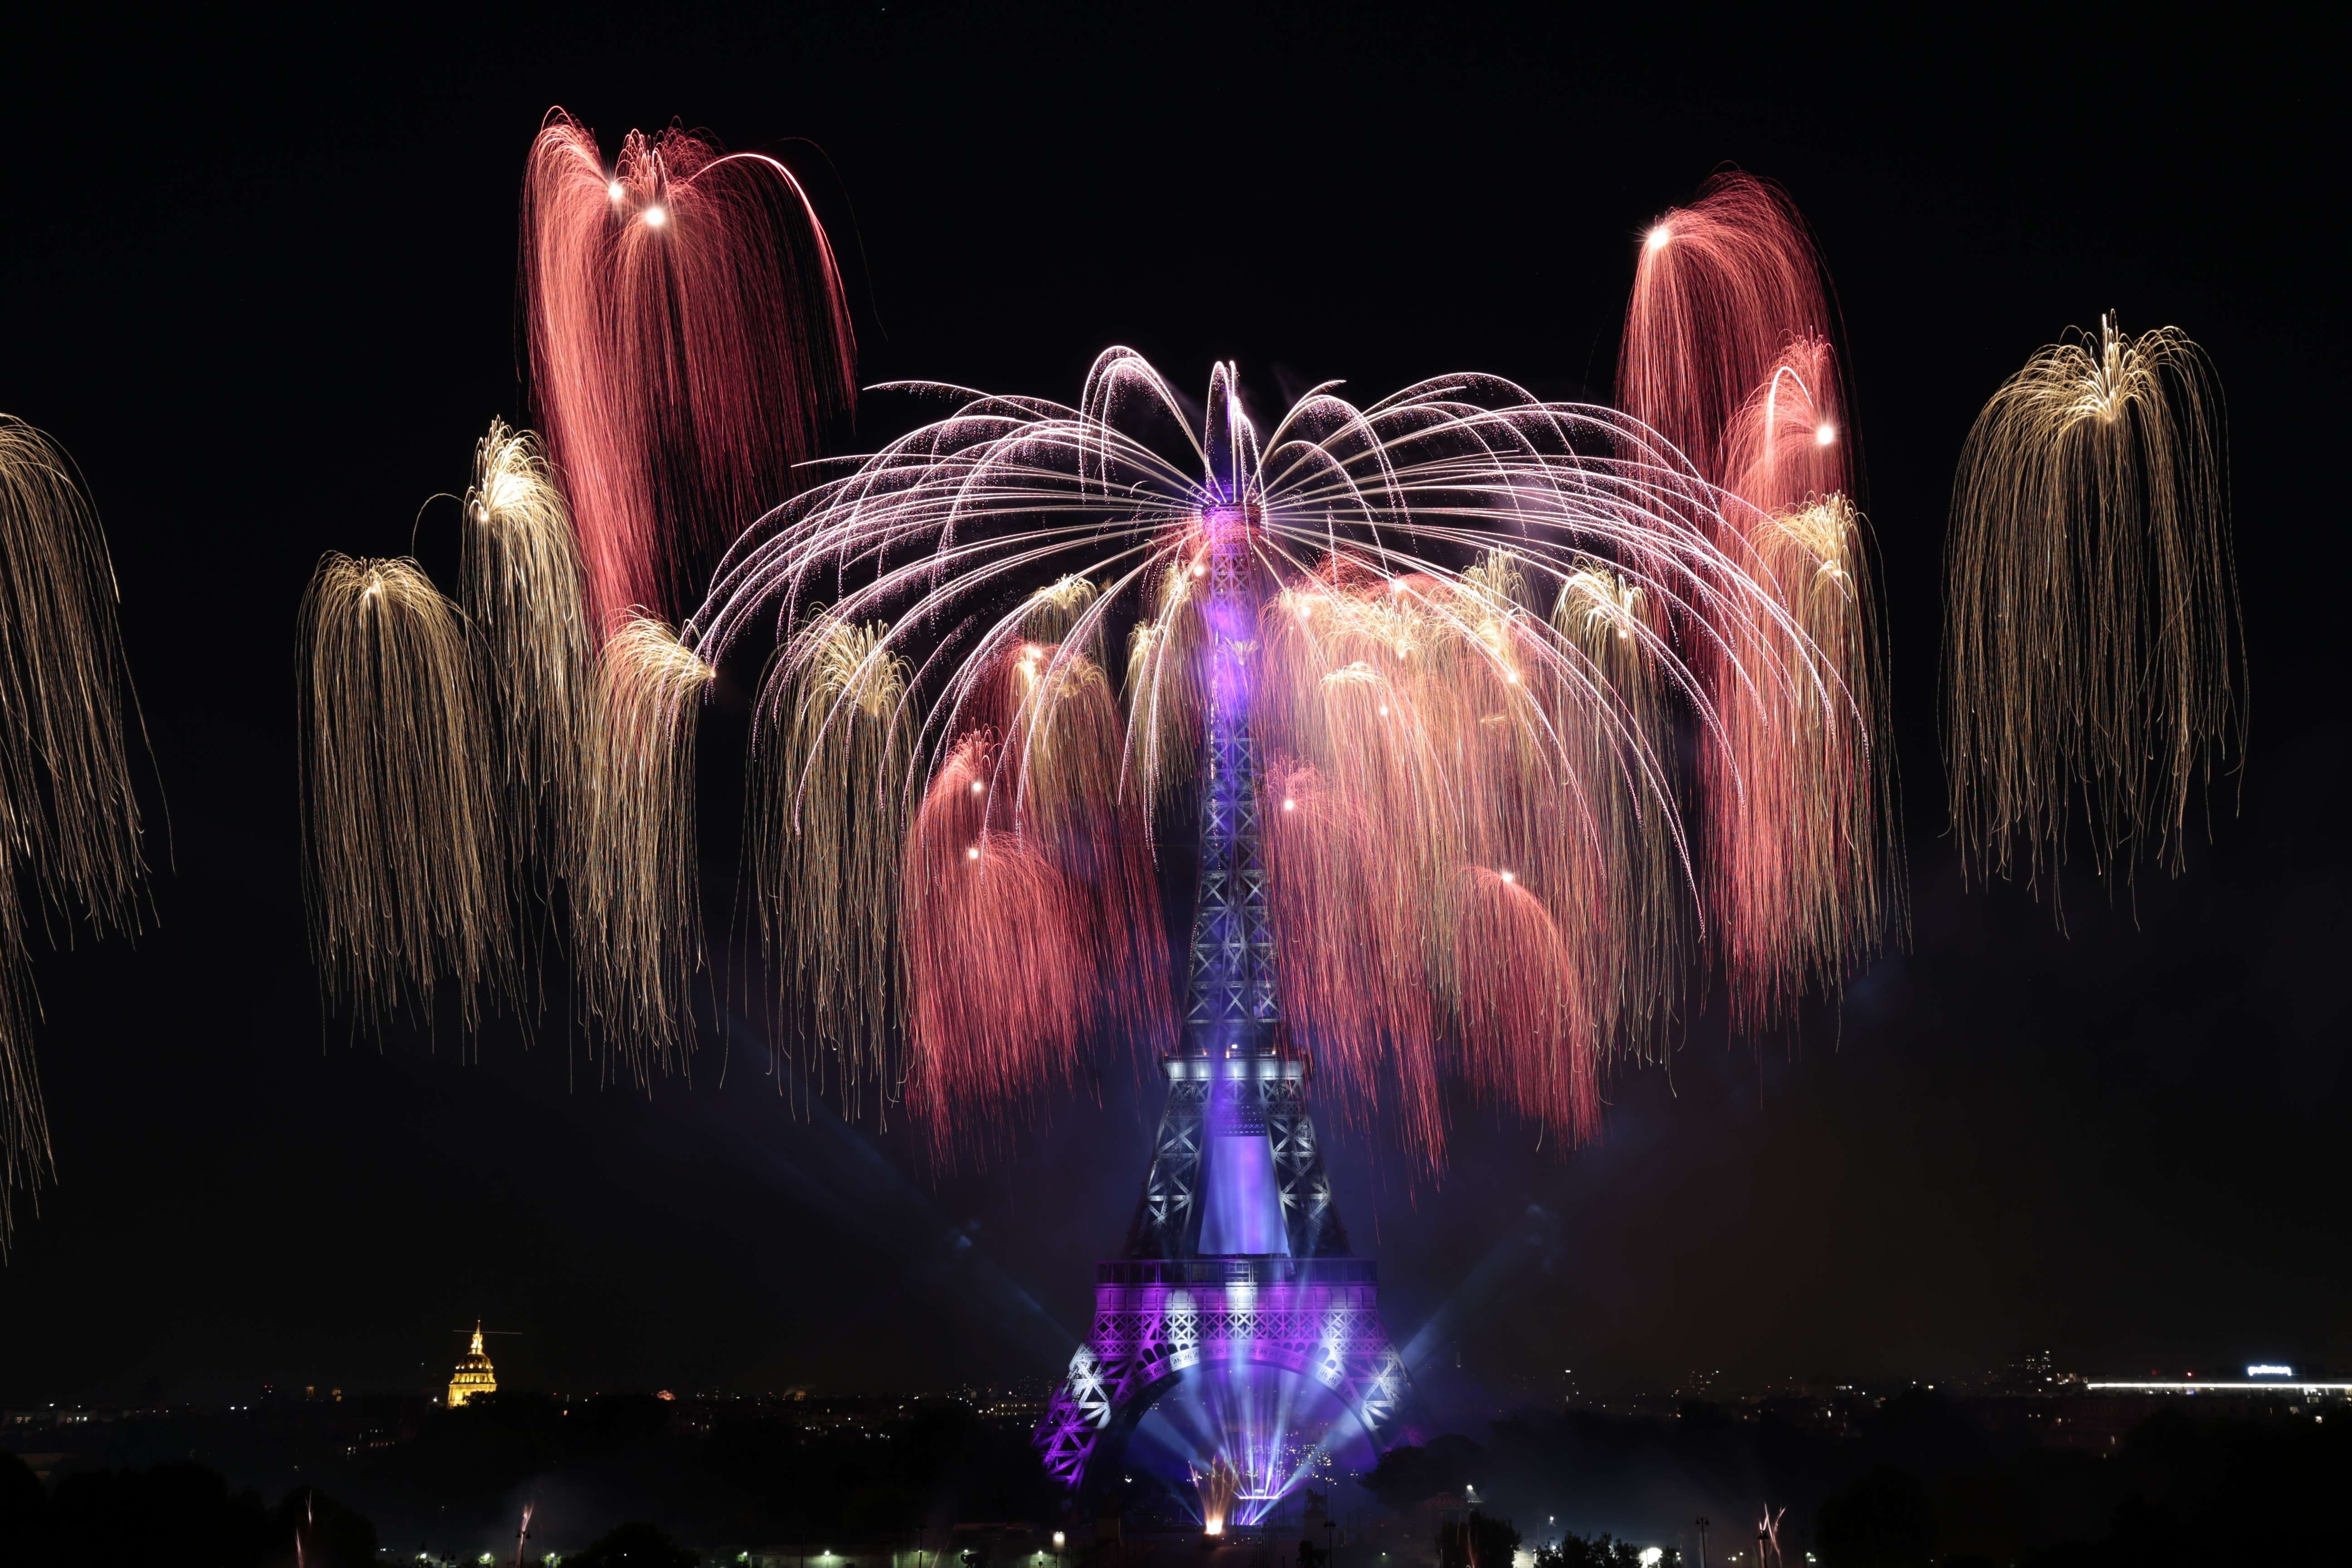 Fireworks light the skies above the Eiffel Tower in the French capital Paris, on July 14 as part of France's annual Bastille Day celebrations. (AFP/ Joel Saget)